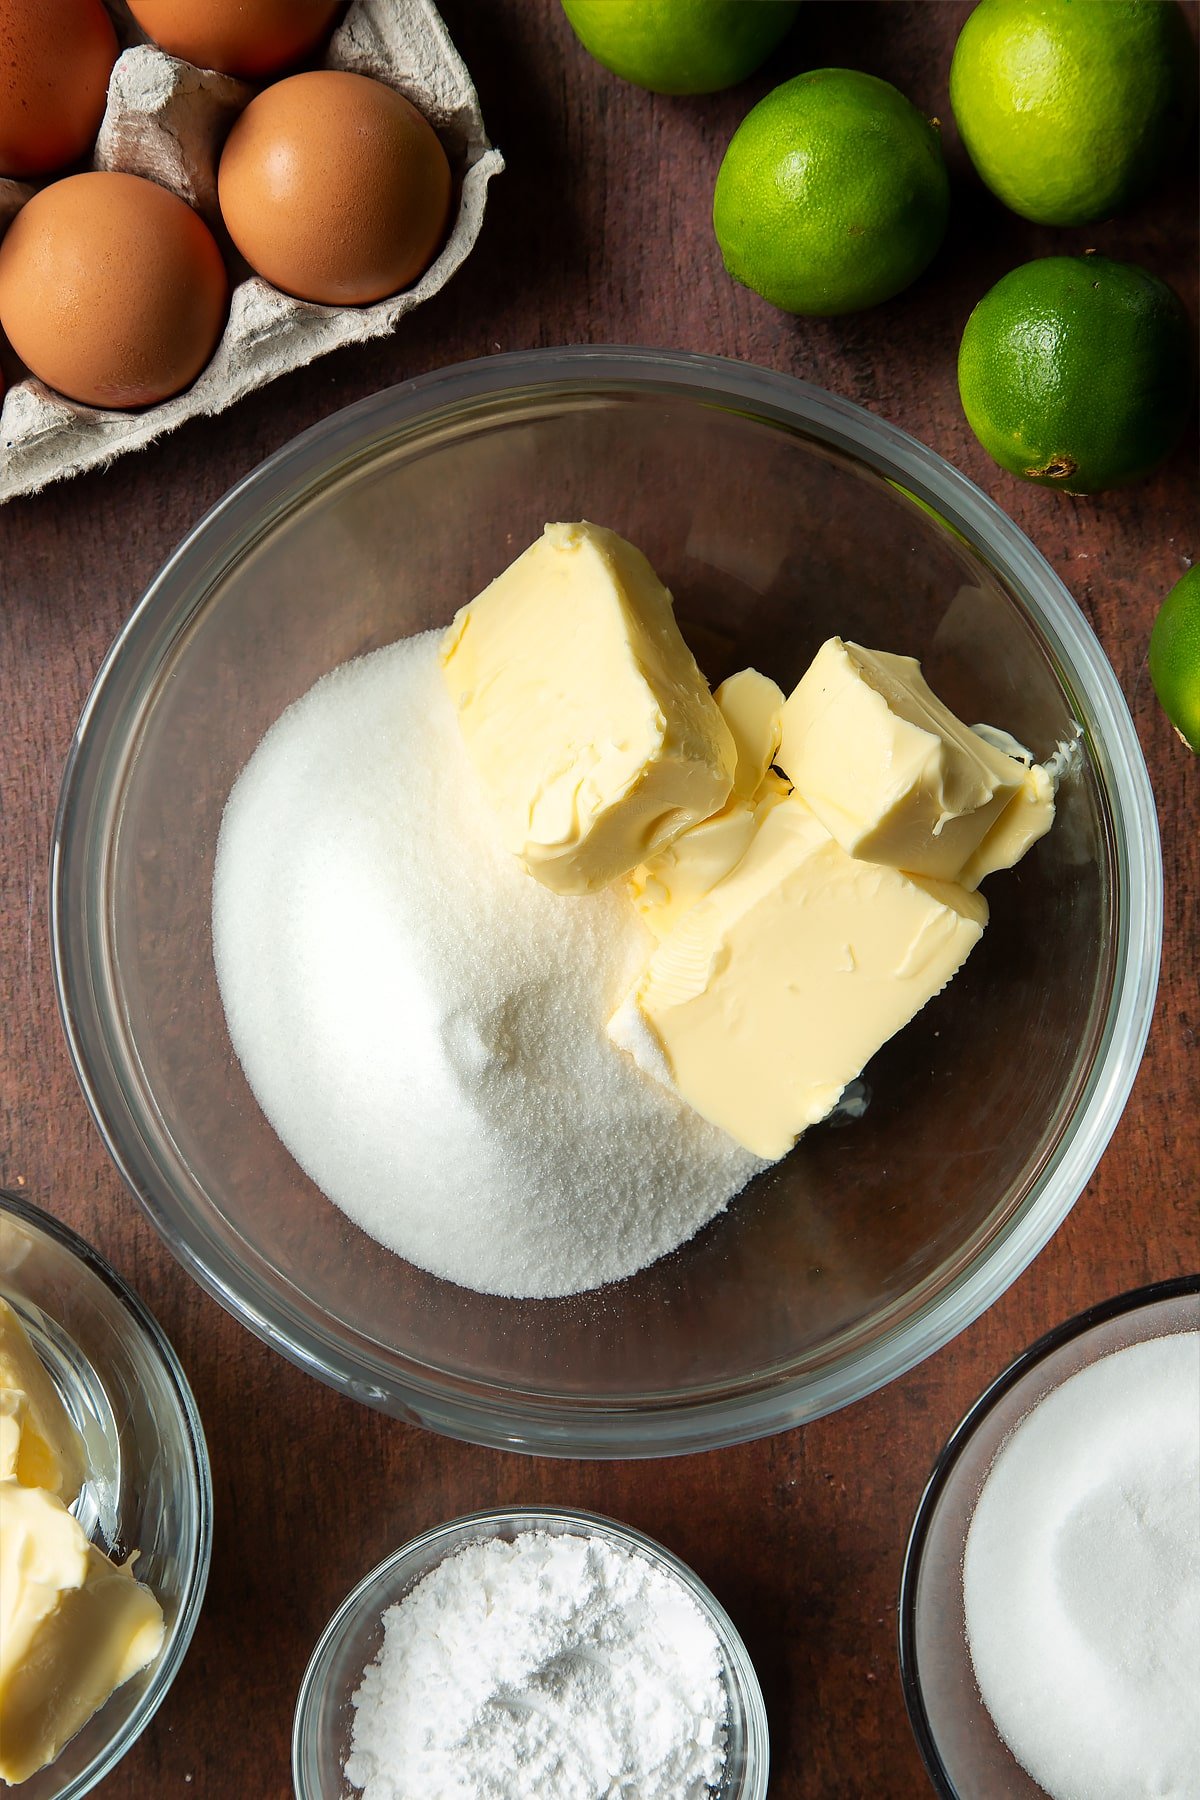 Butter and sugar in a mixing bowl. Ingredients to make lime drizzle cake surround the bowl.